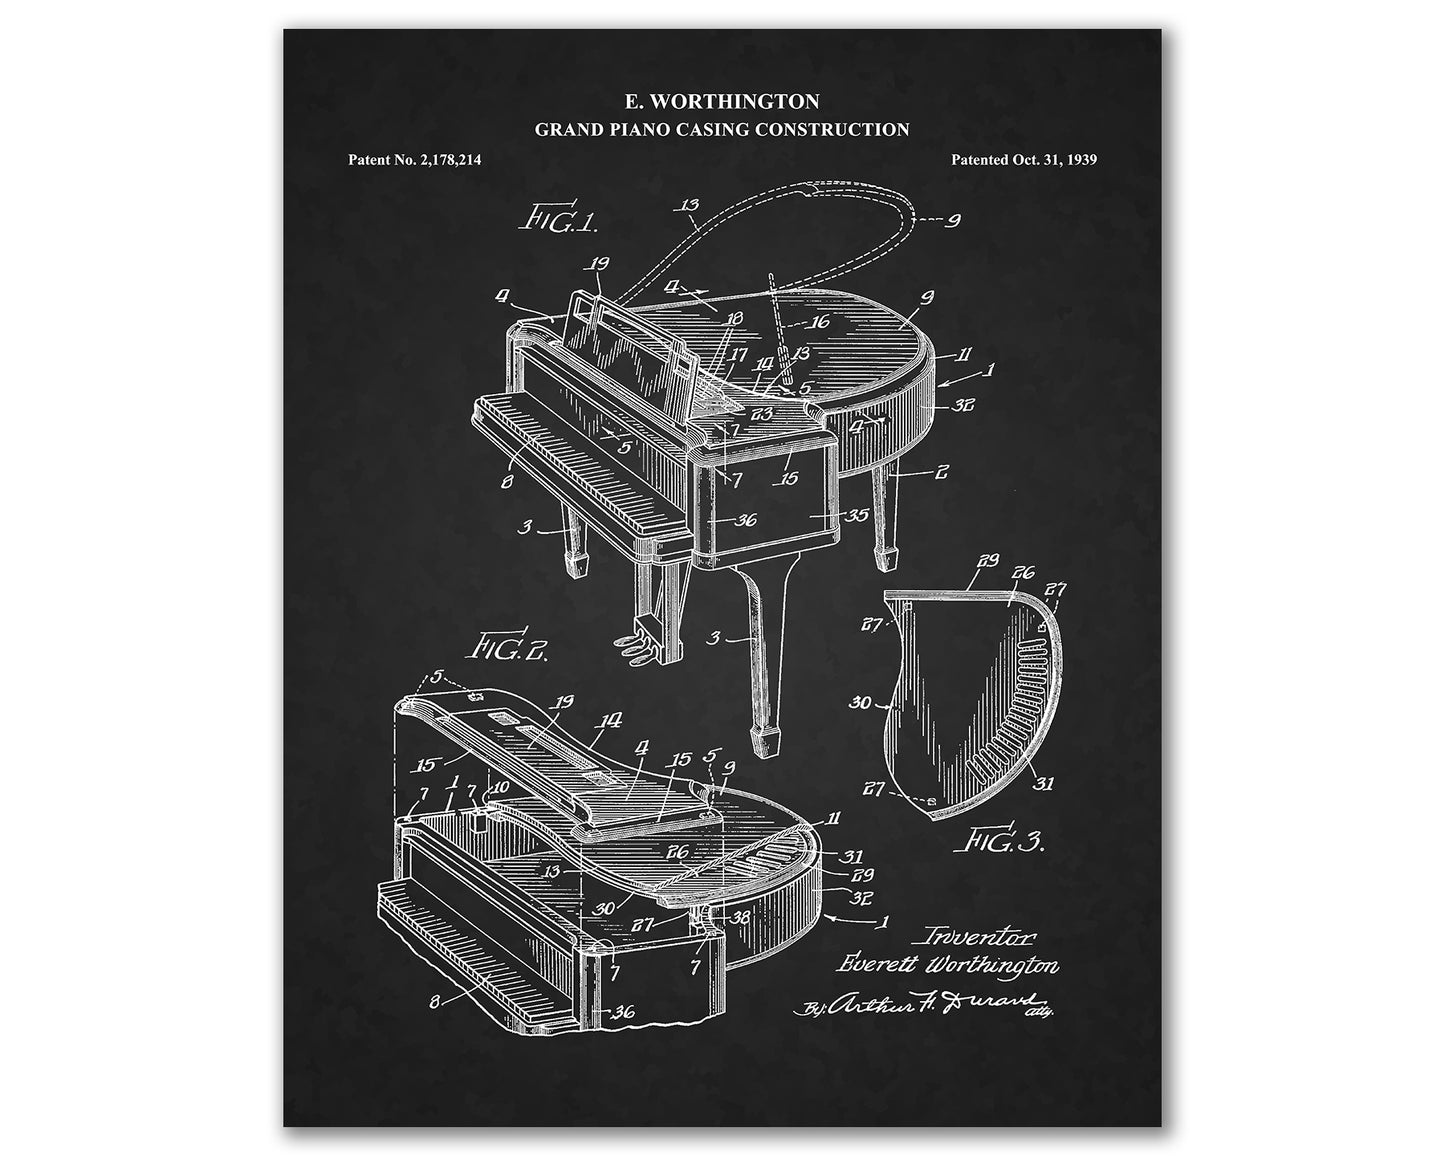 Grand Piano Patent Drawings, Music Studio Wall Art Poster, Great Vintage Room Decor, Art Prints, Musician Decor Gifts 03072